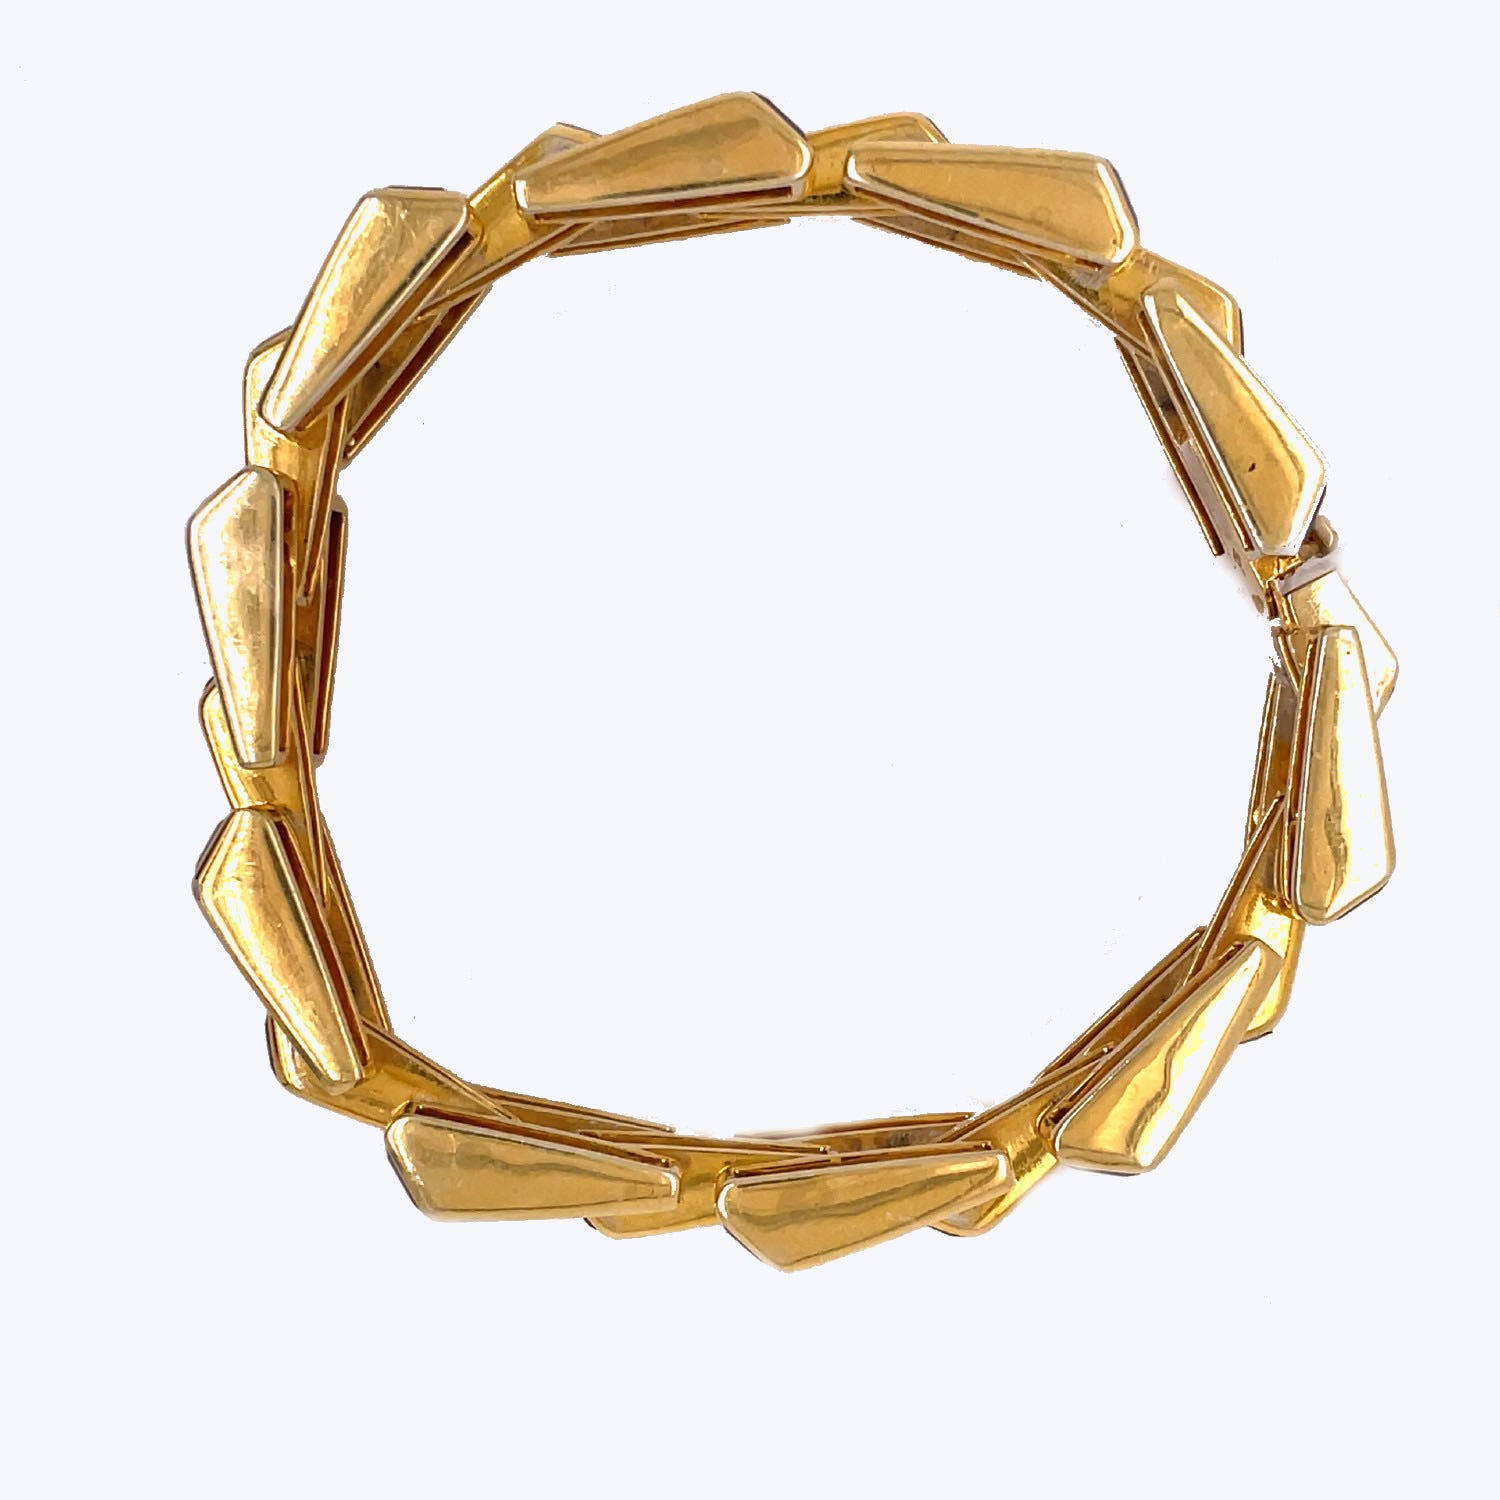 Elegant gold bracelet with interconnected elongated hexagon-shaped pieces